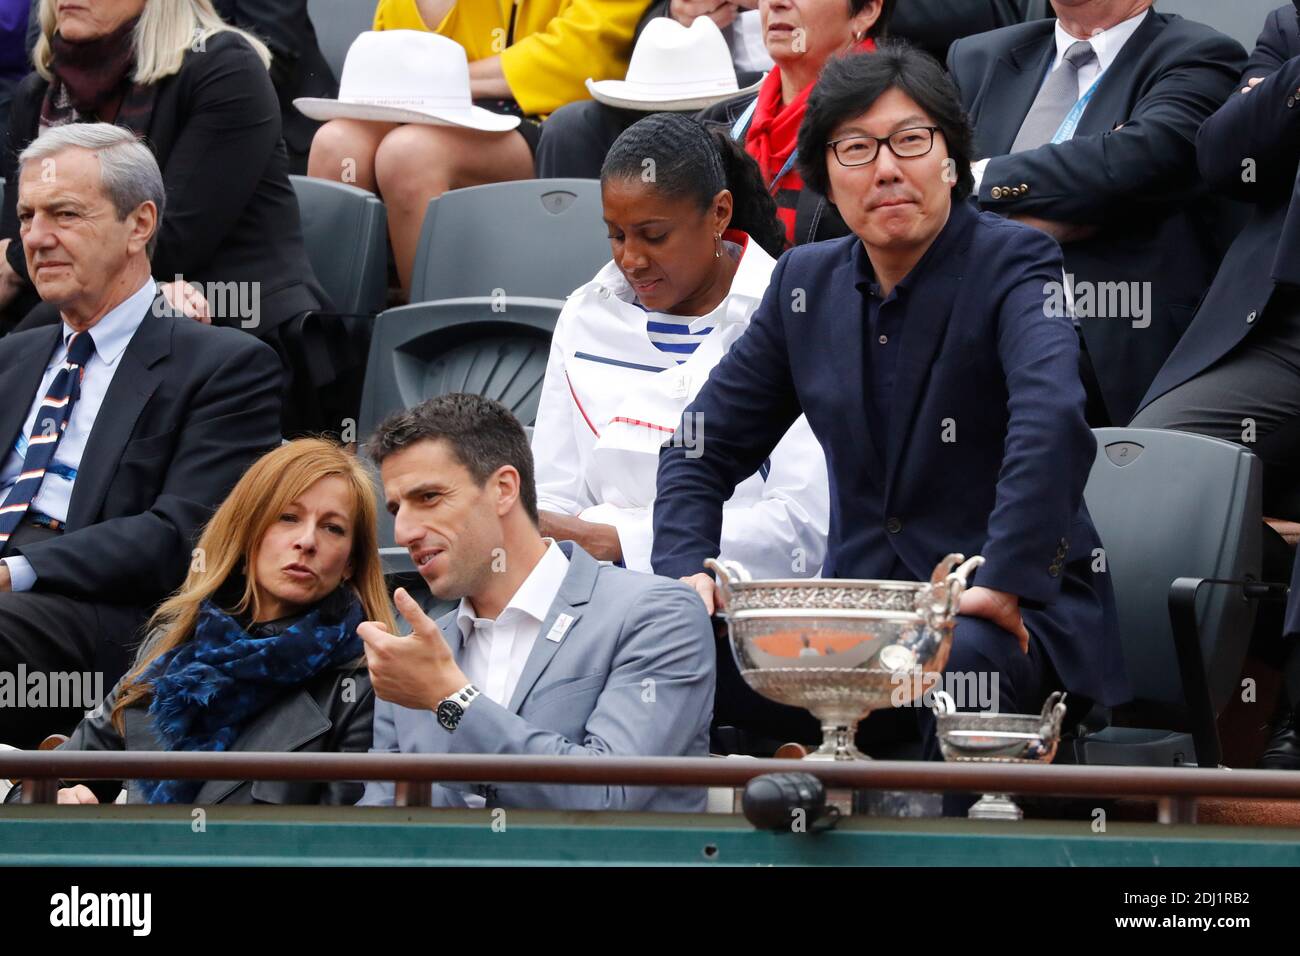 Anne Graven, Tony Estanguet, Marie-José Perec and Jean-Vincent Place  watching Serbia's Novak Djokovic winning the Final against United Kingdom's  Andy Murray at the 2016 BNP Paribas tennis French Open at Roland-Garros  Stadium,